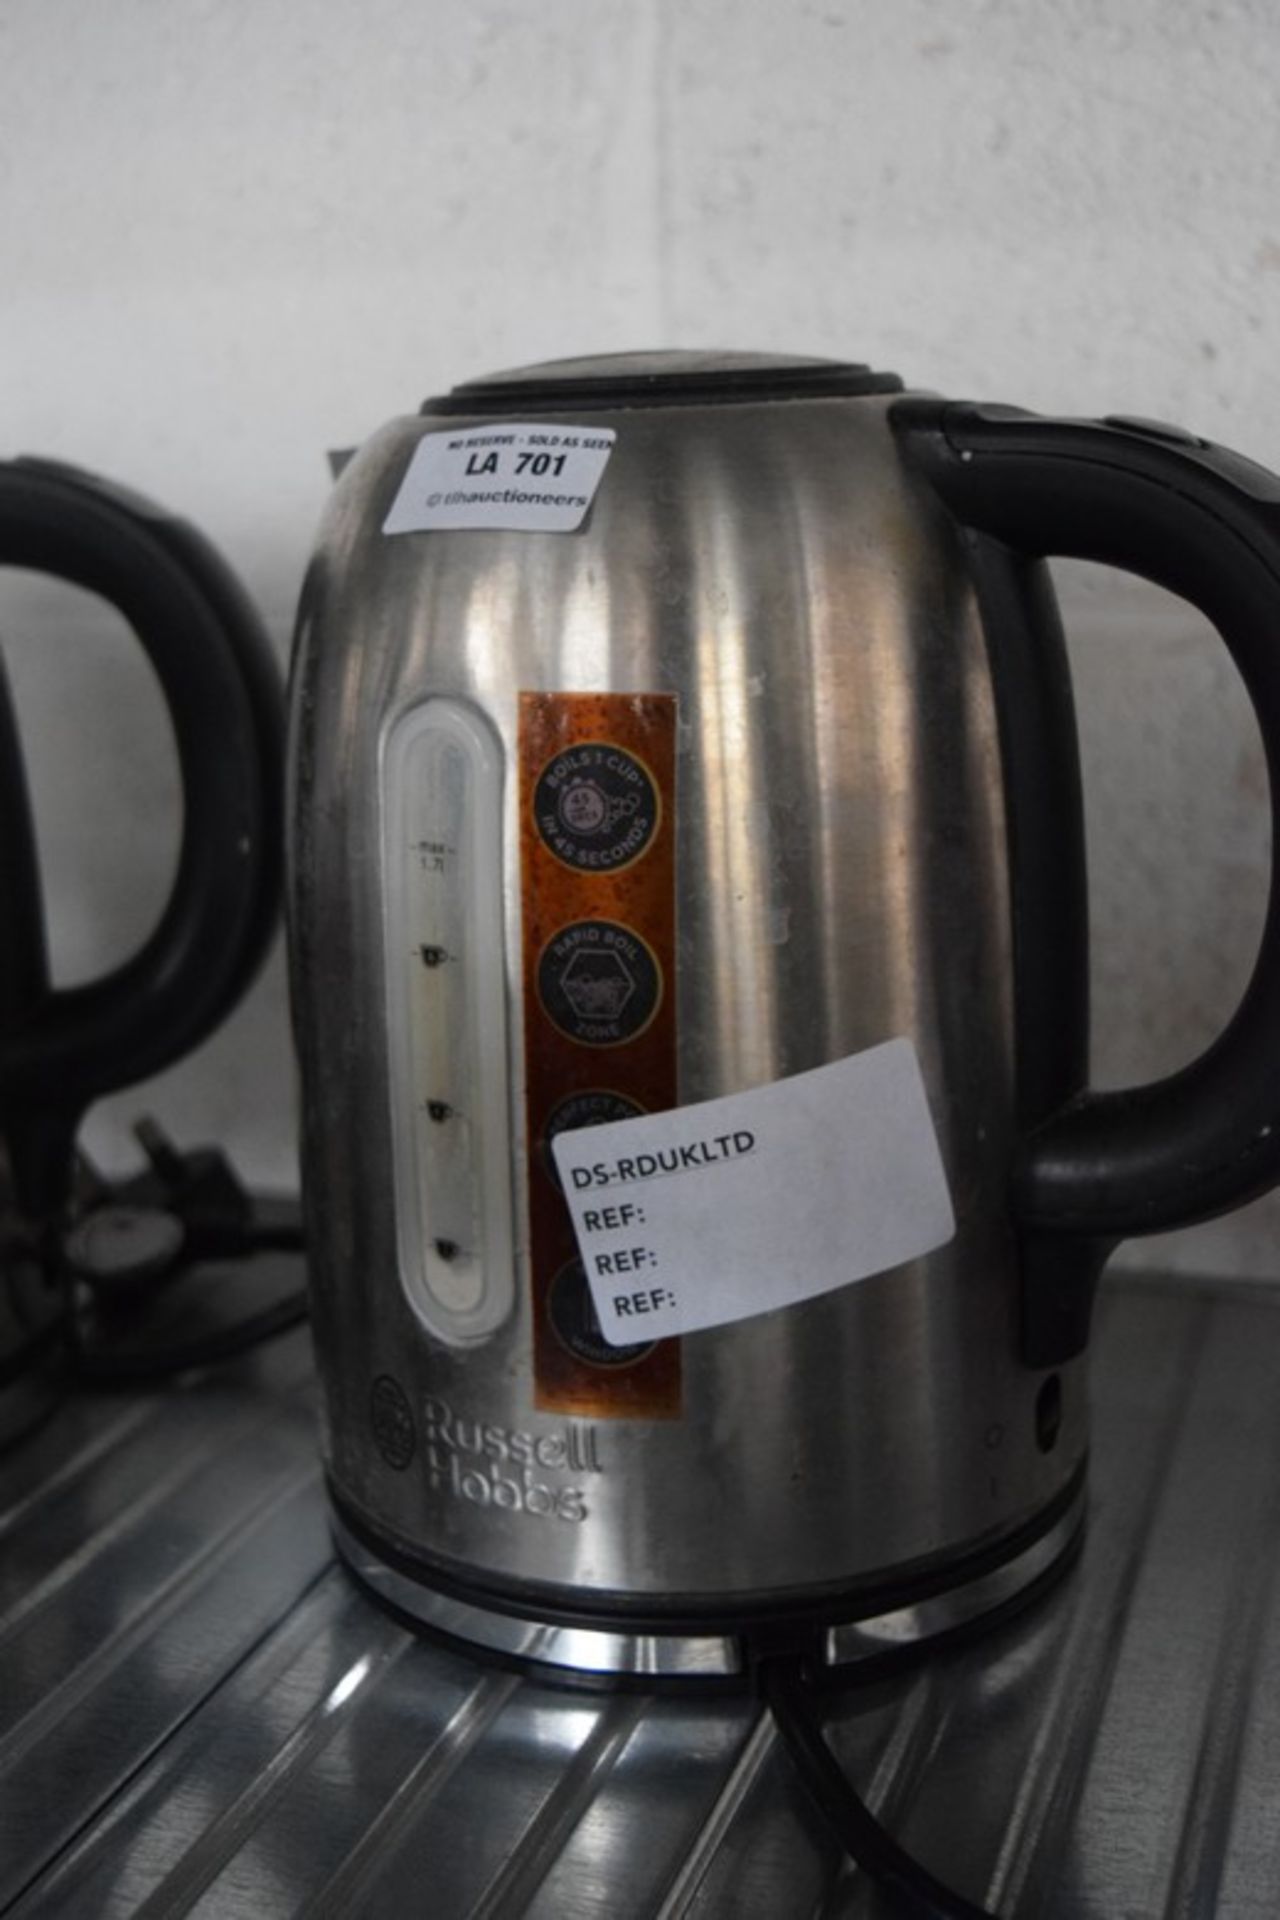 1 X UNBOXED RUSSELL HOBBS 1.5 LITRE CORDLESS JUG KETTLE IN STAINLESS STEEL